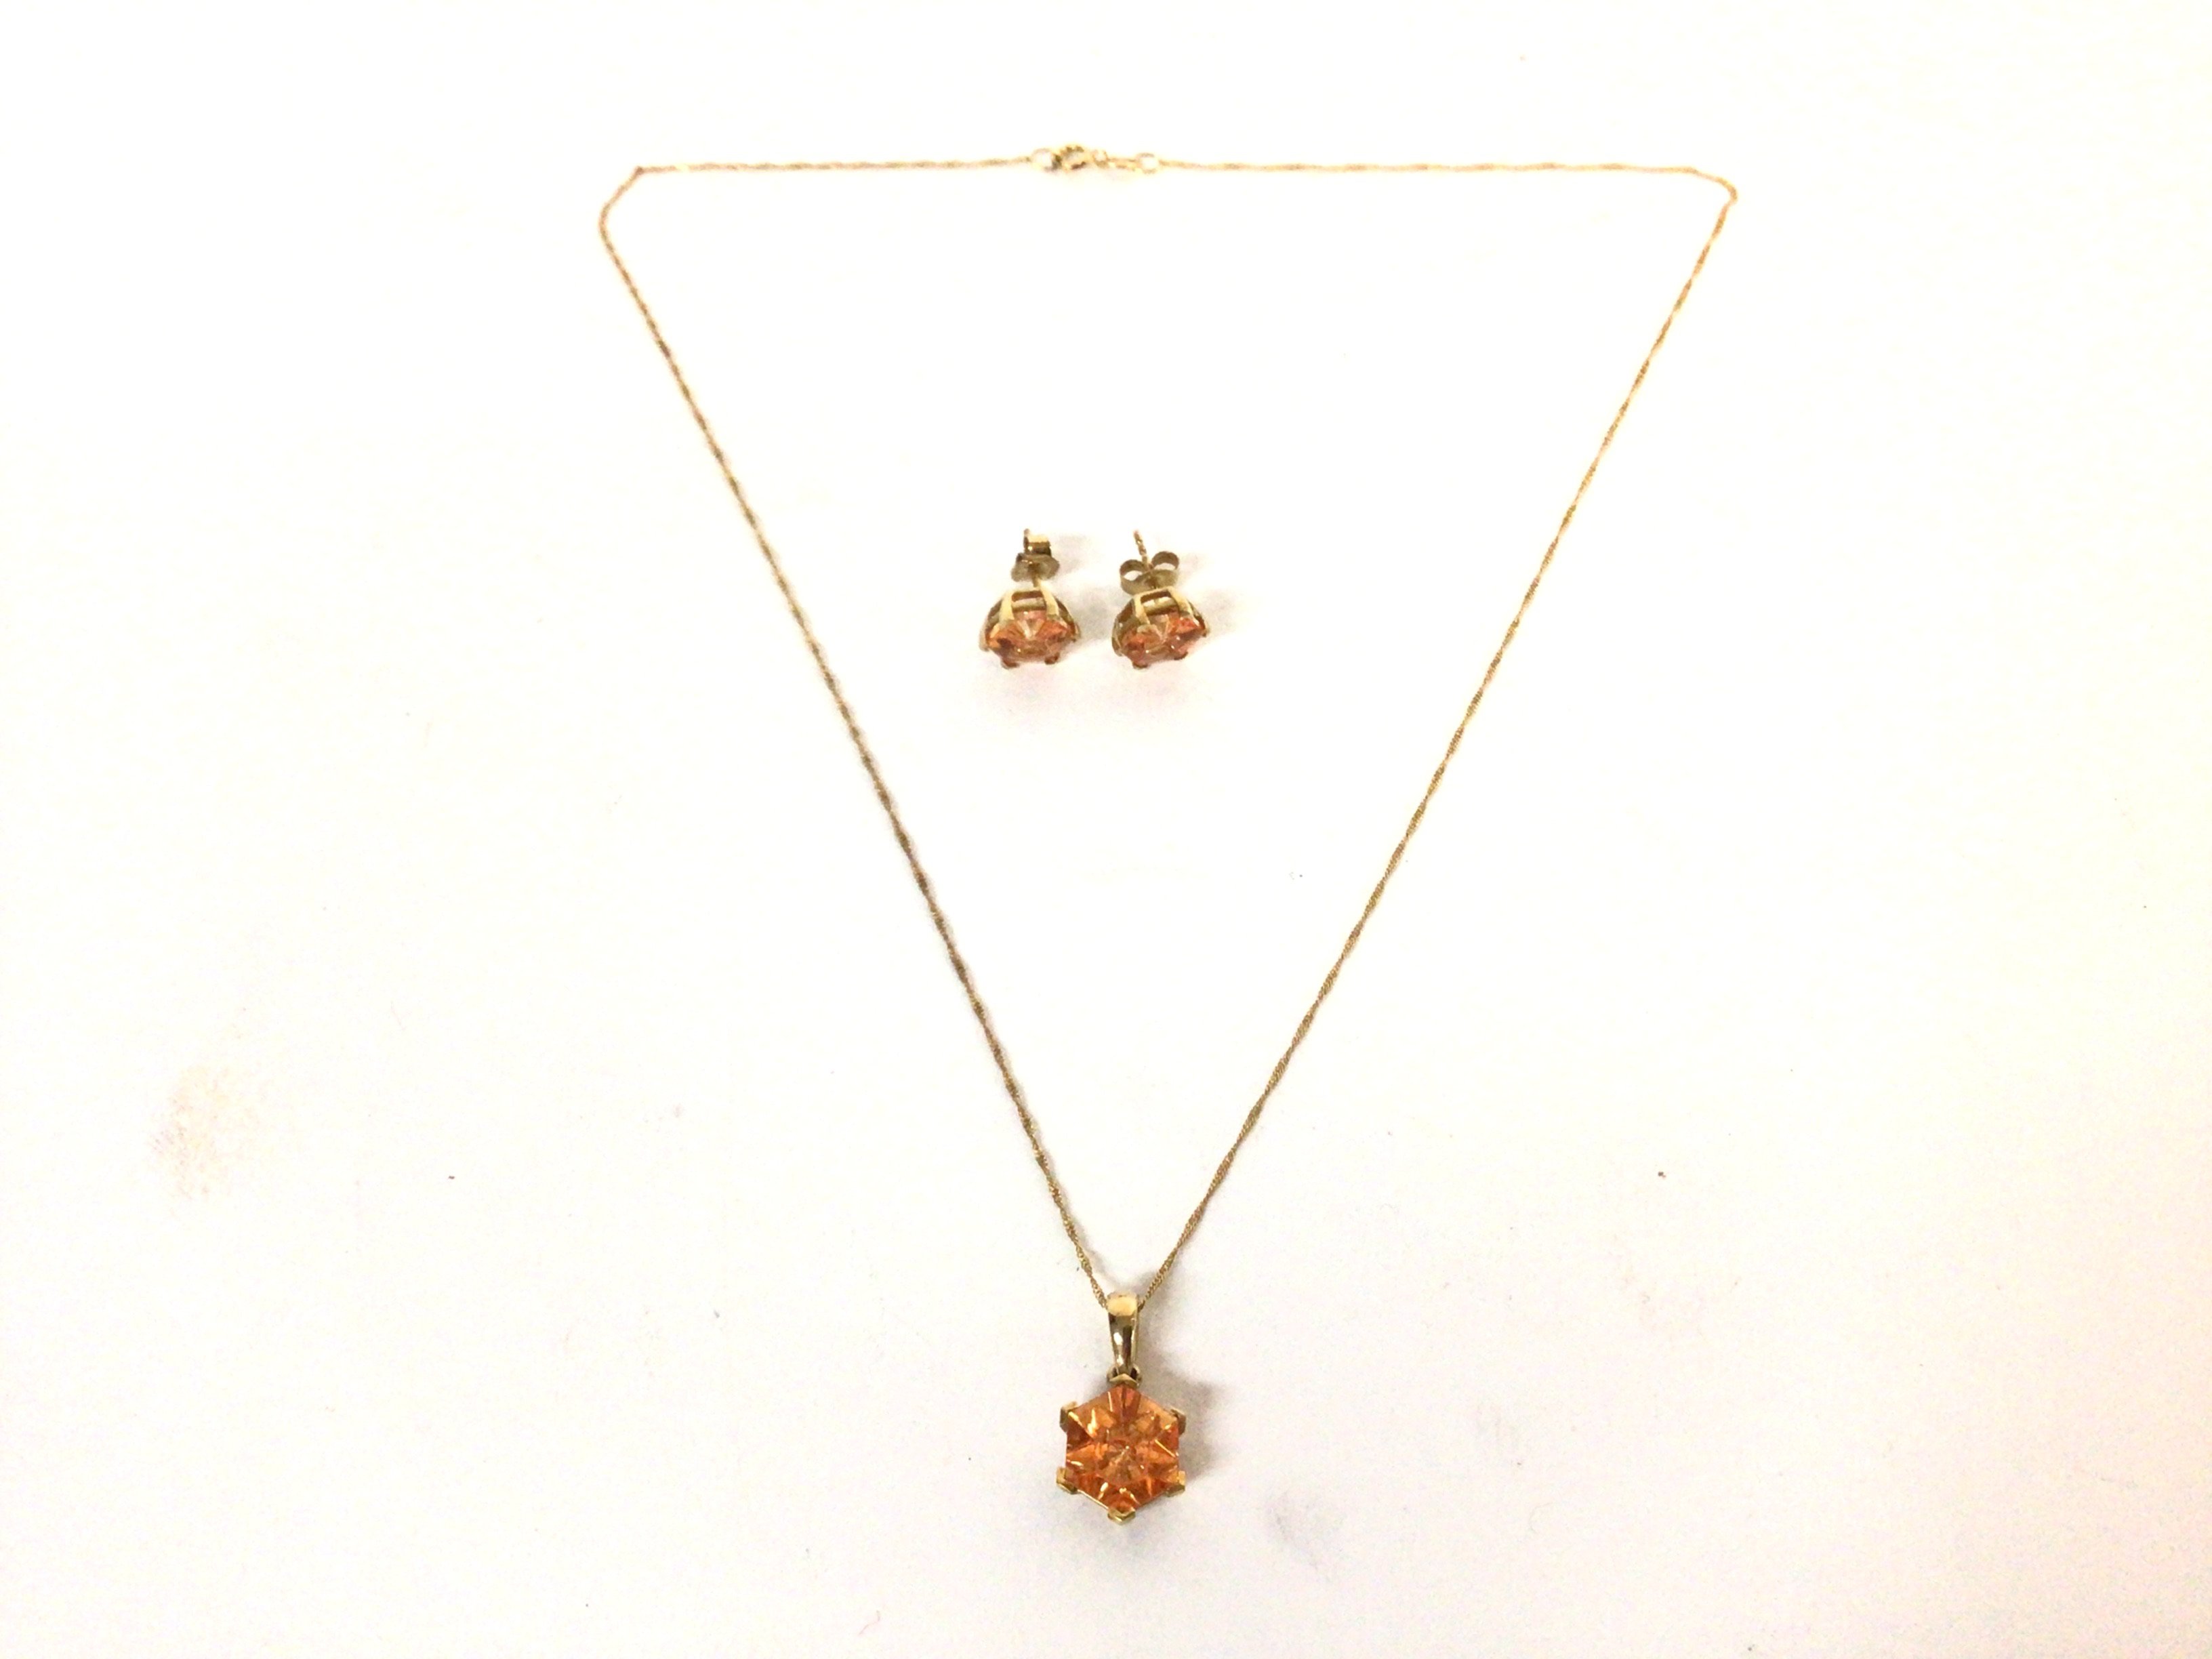 9k gold pendant and stud earring set with Quartz w - Image 2 of 3